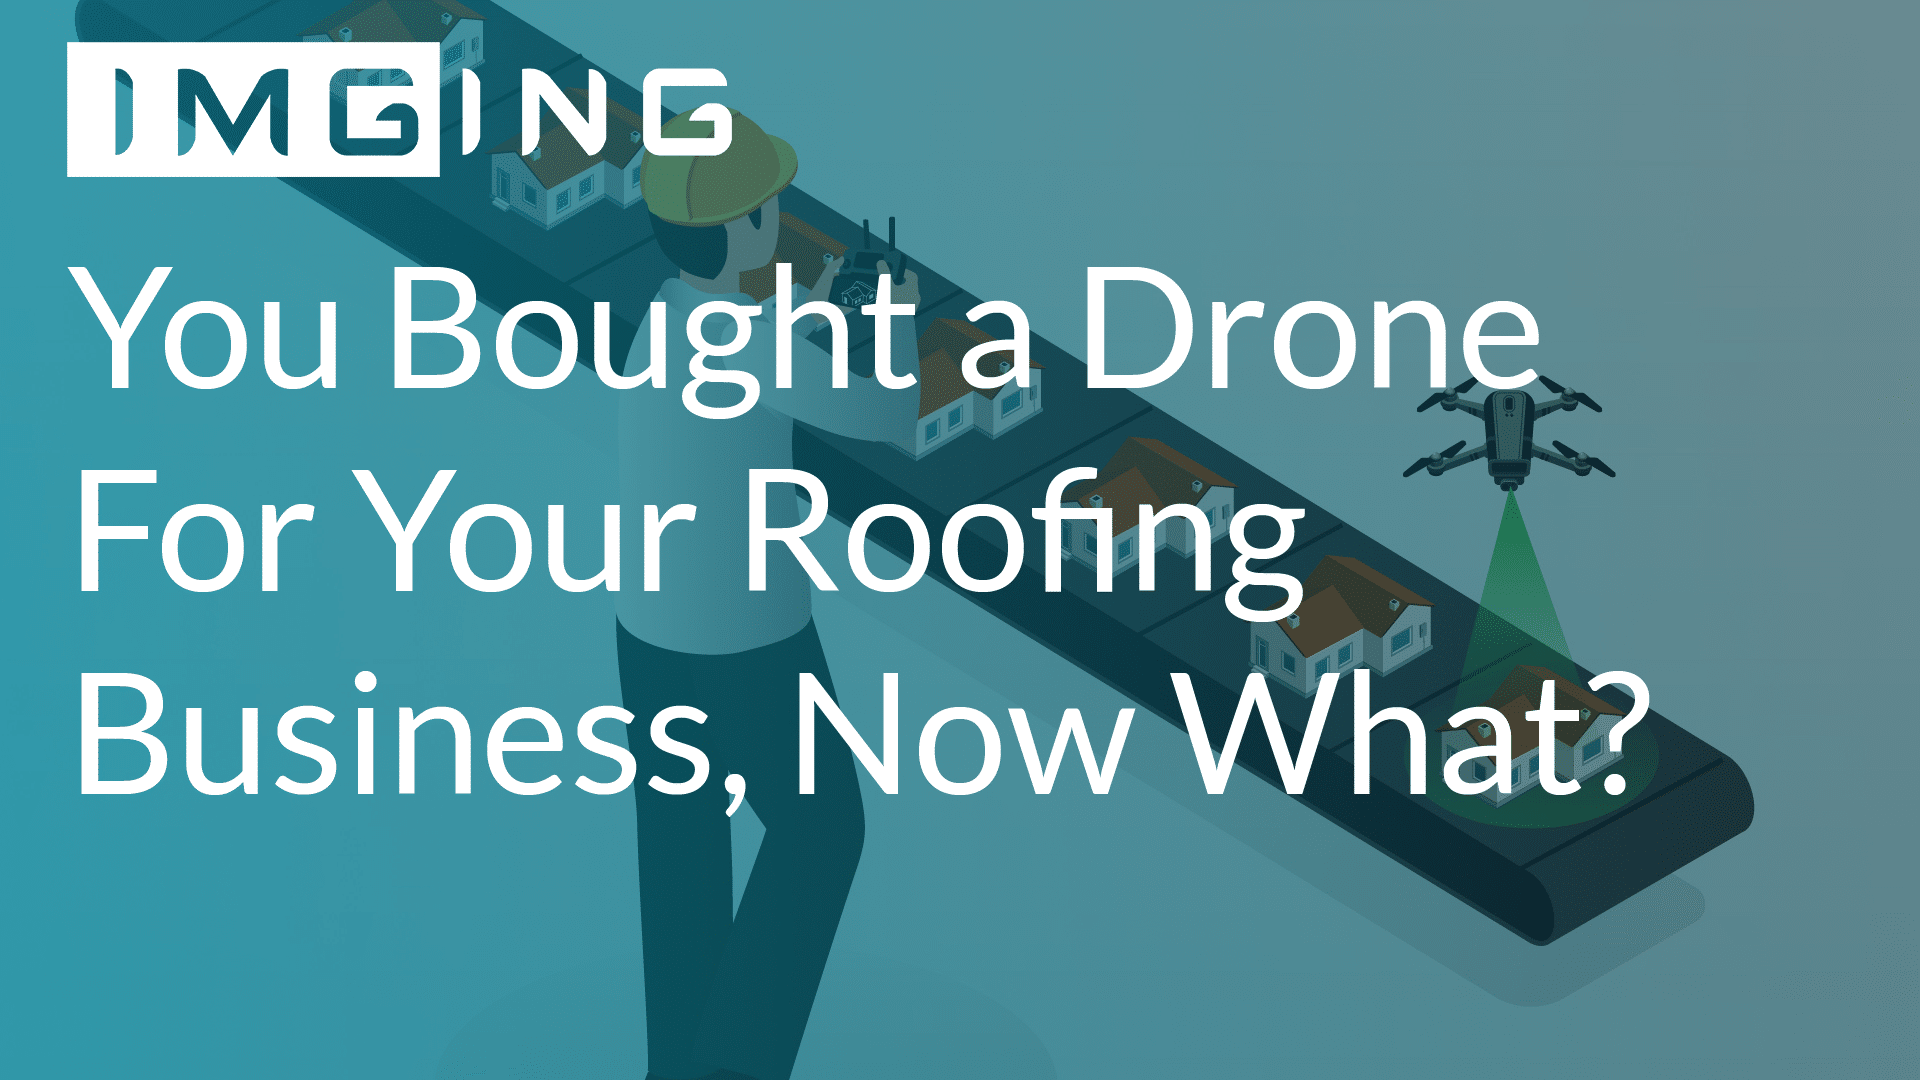 Drone for roofing businesses